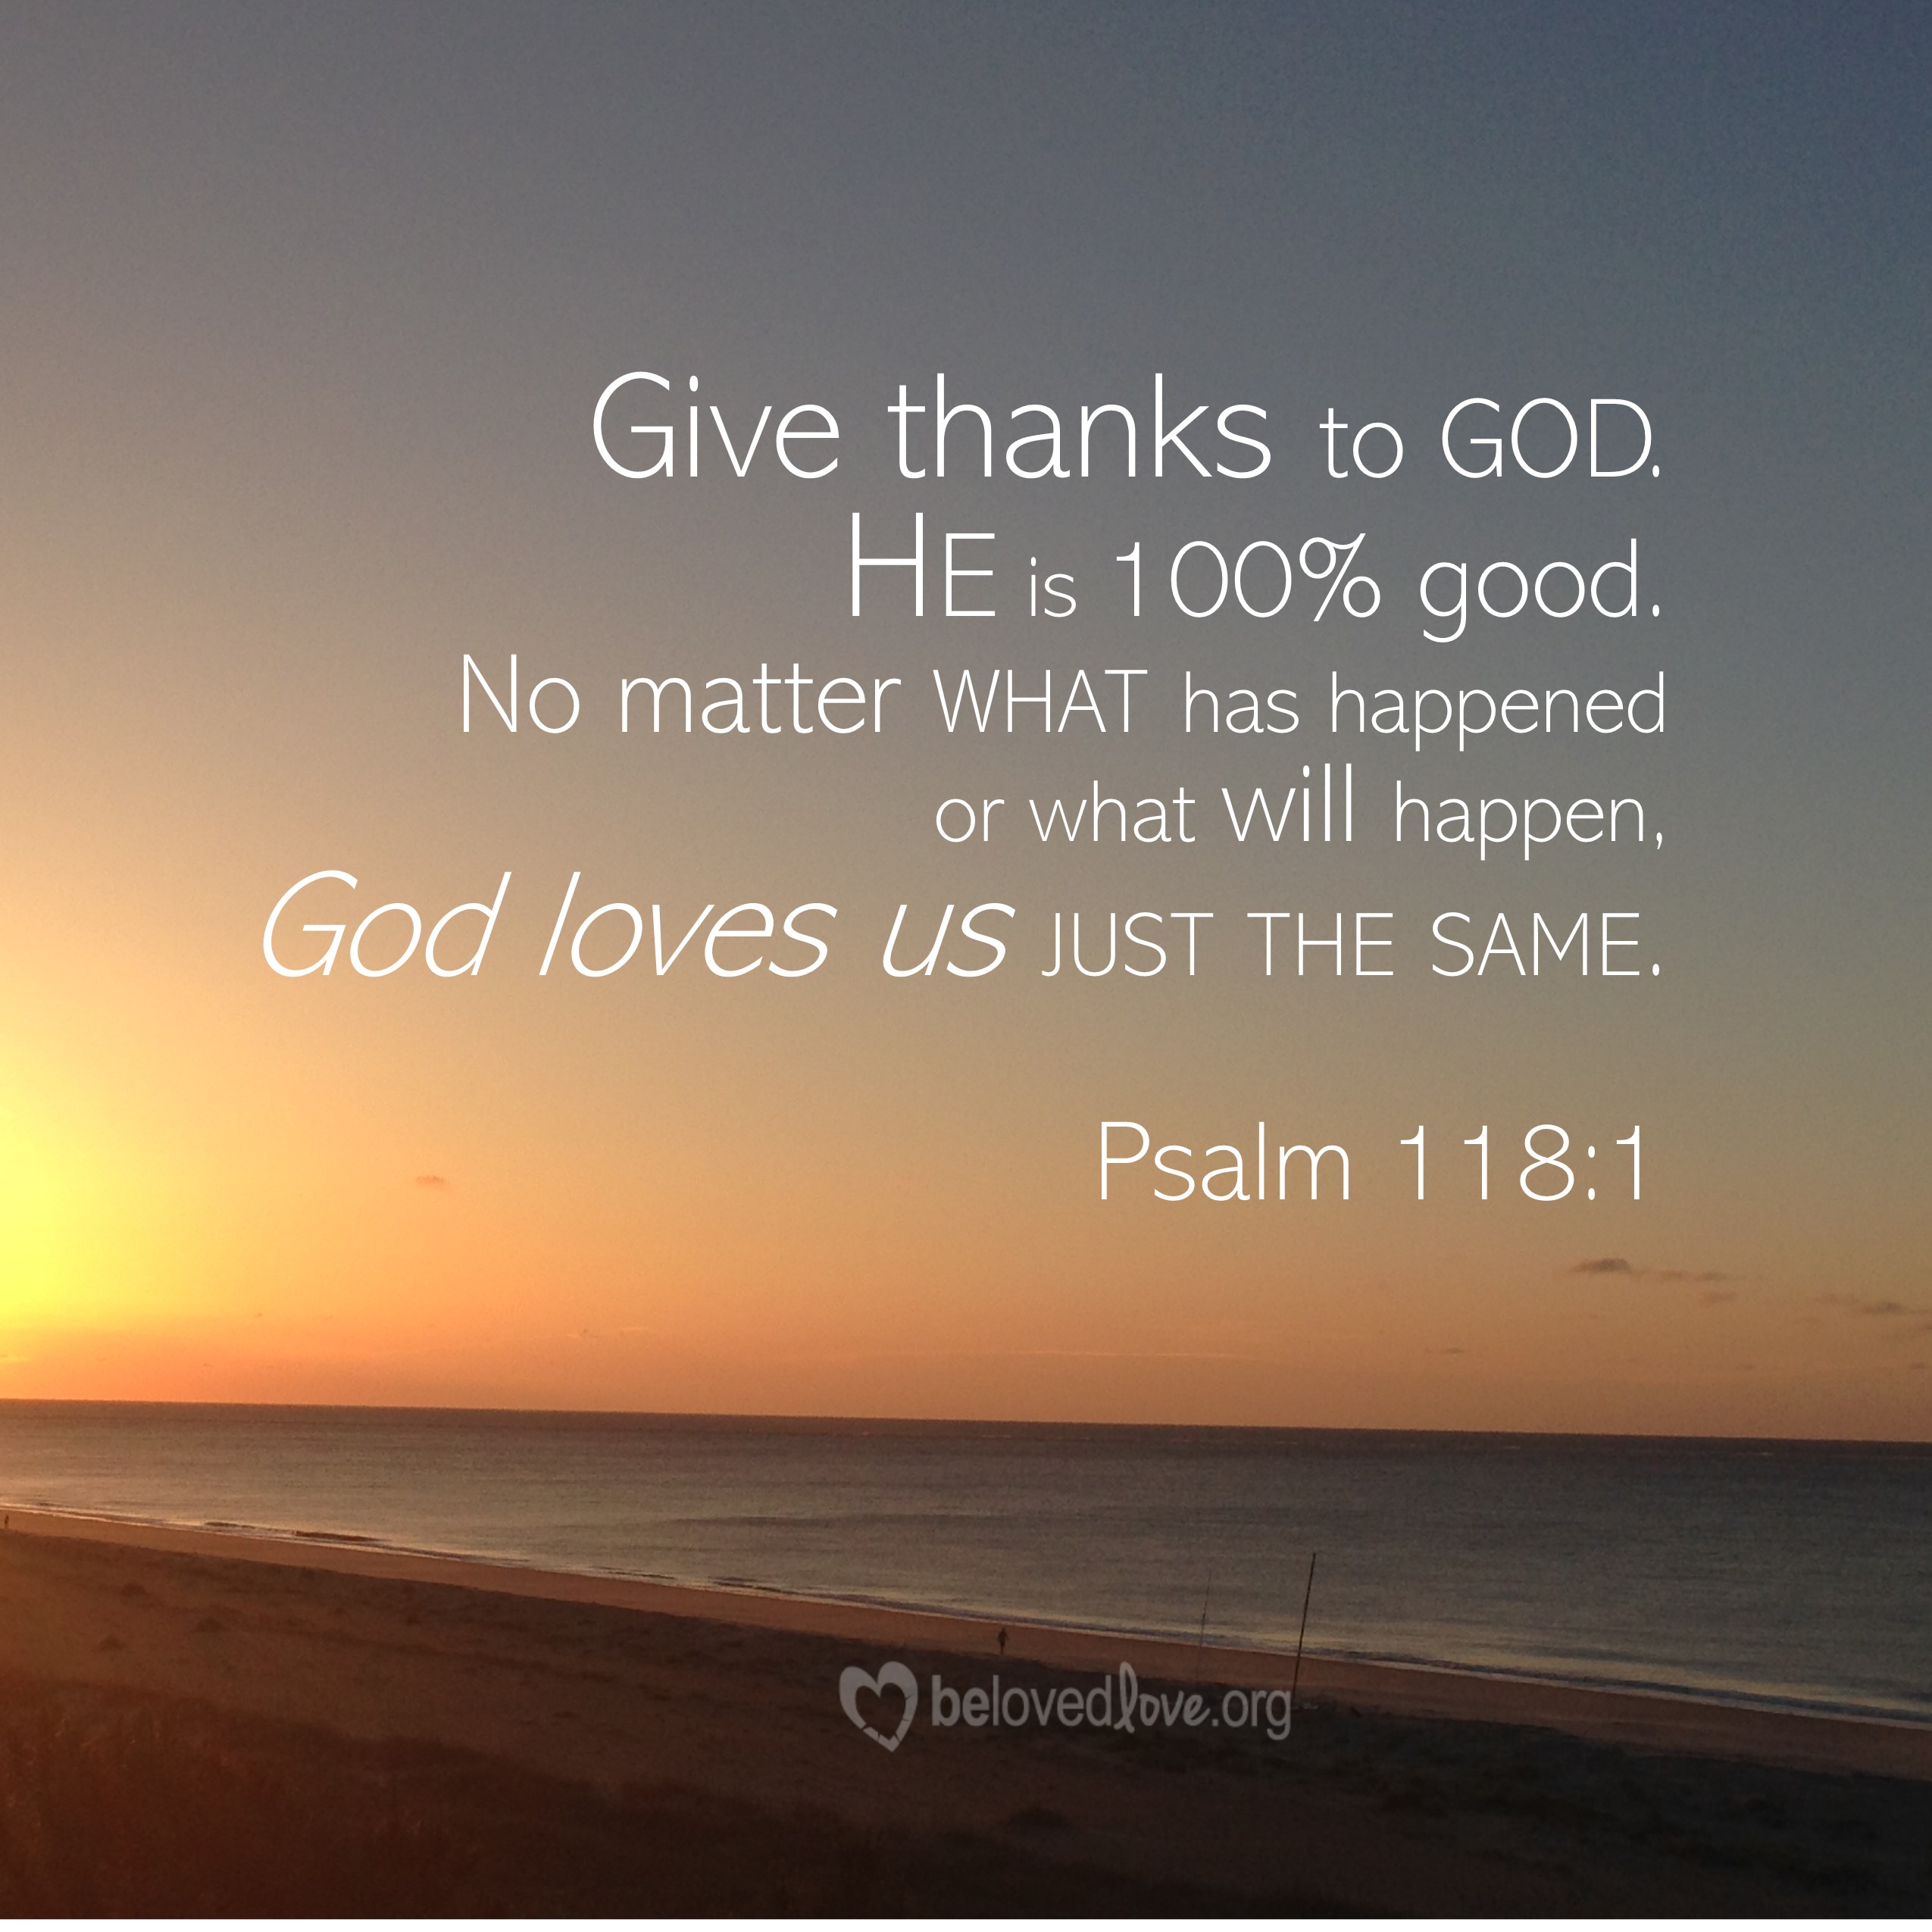 Give thanks to God, He is 100% Good